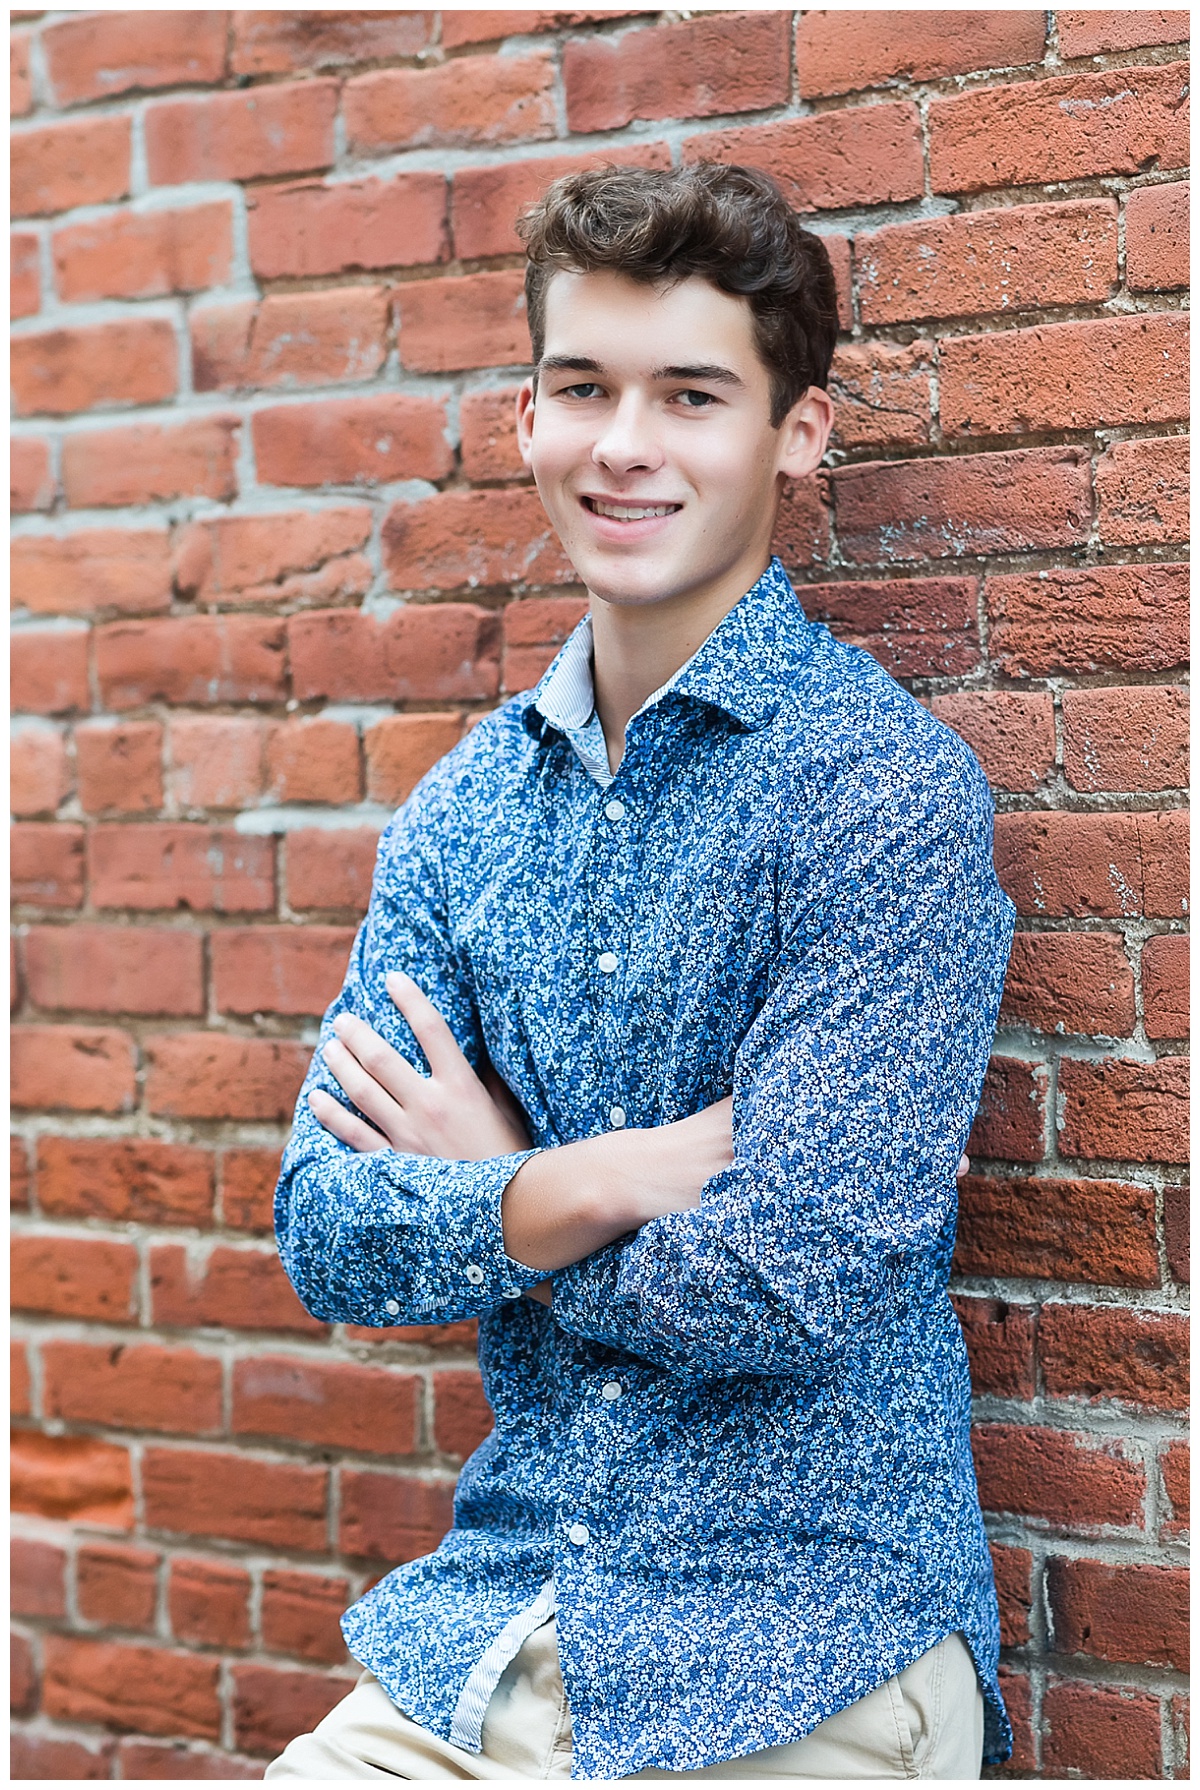 Senior guy in front of brick wall photo by Simply Seeking Photography